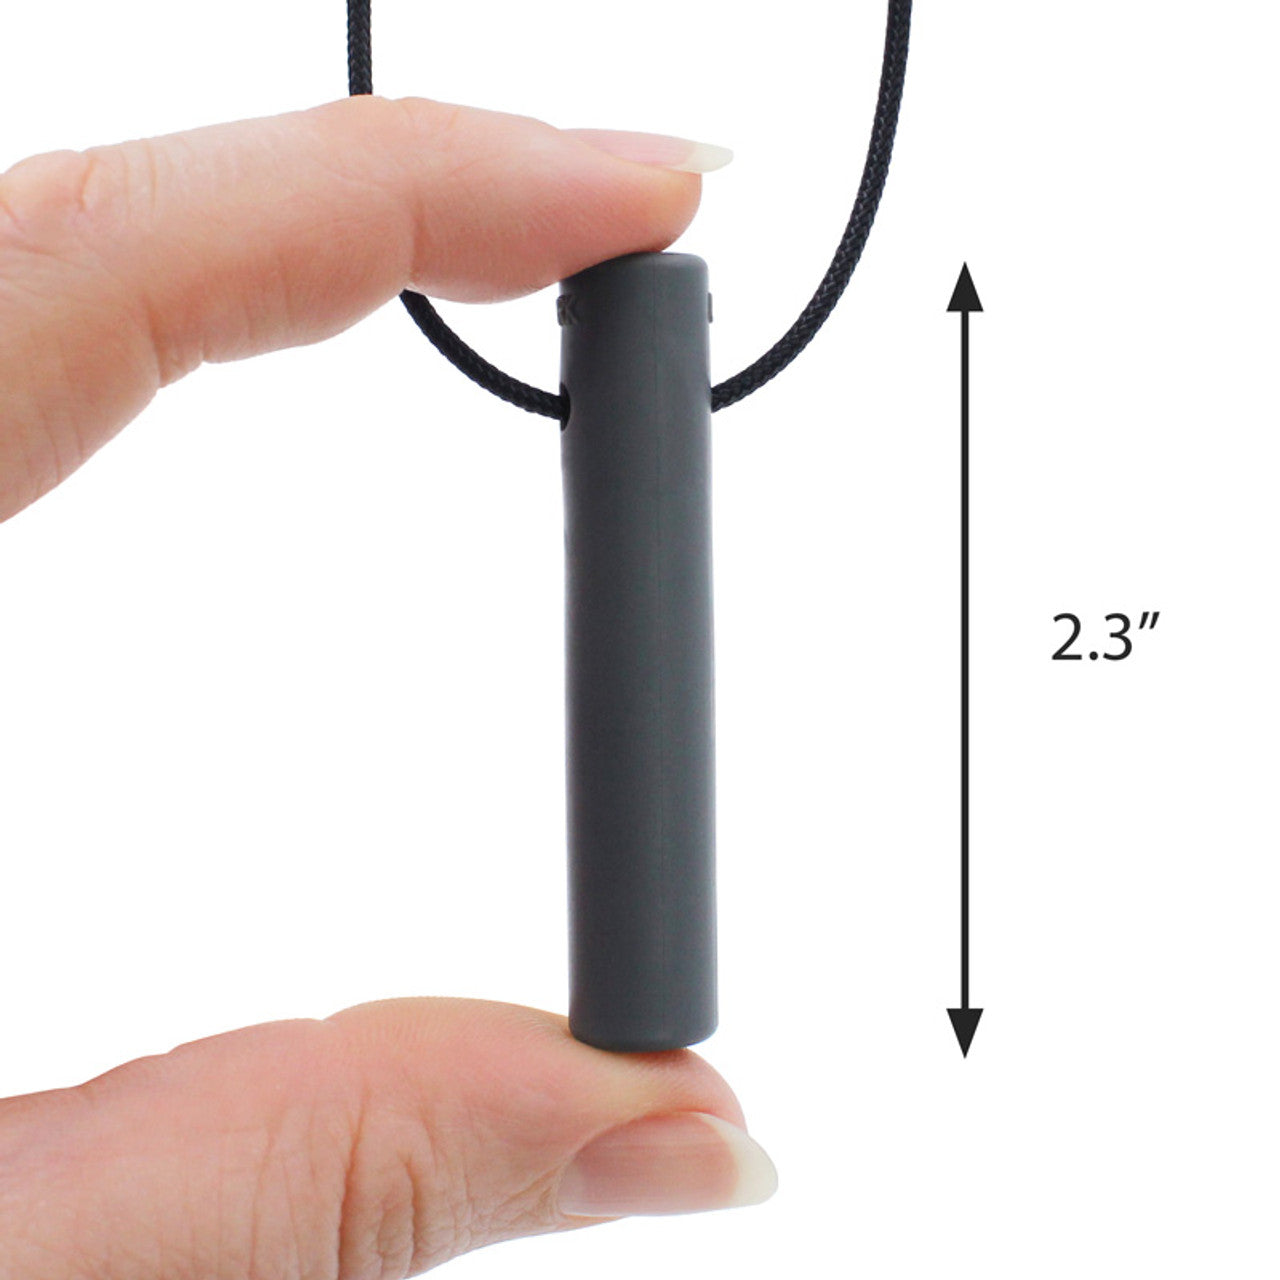 hollow bite tube chewable jewelry  size